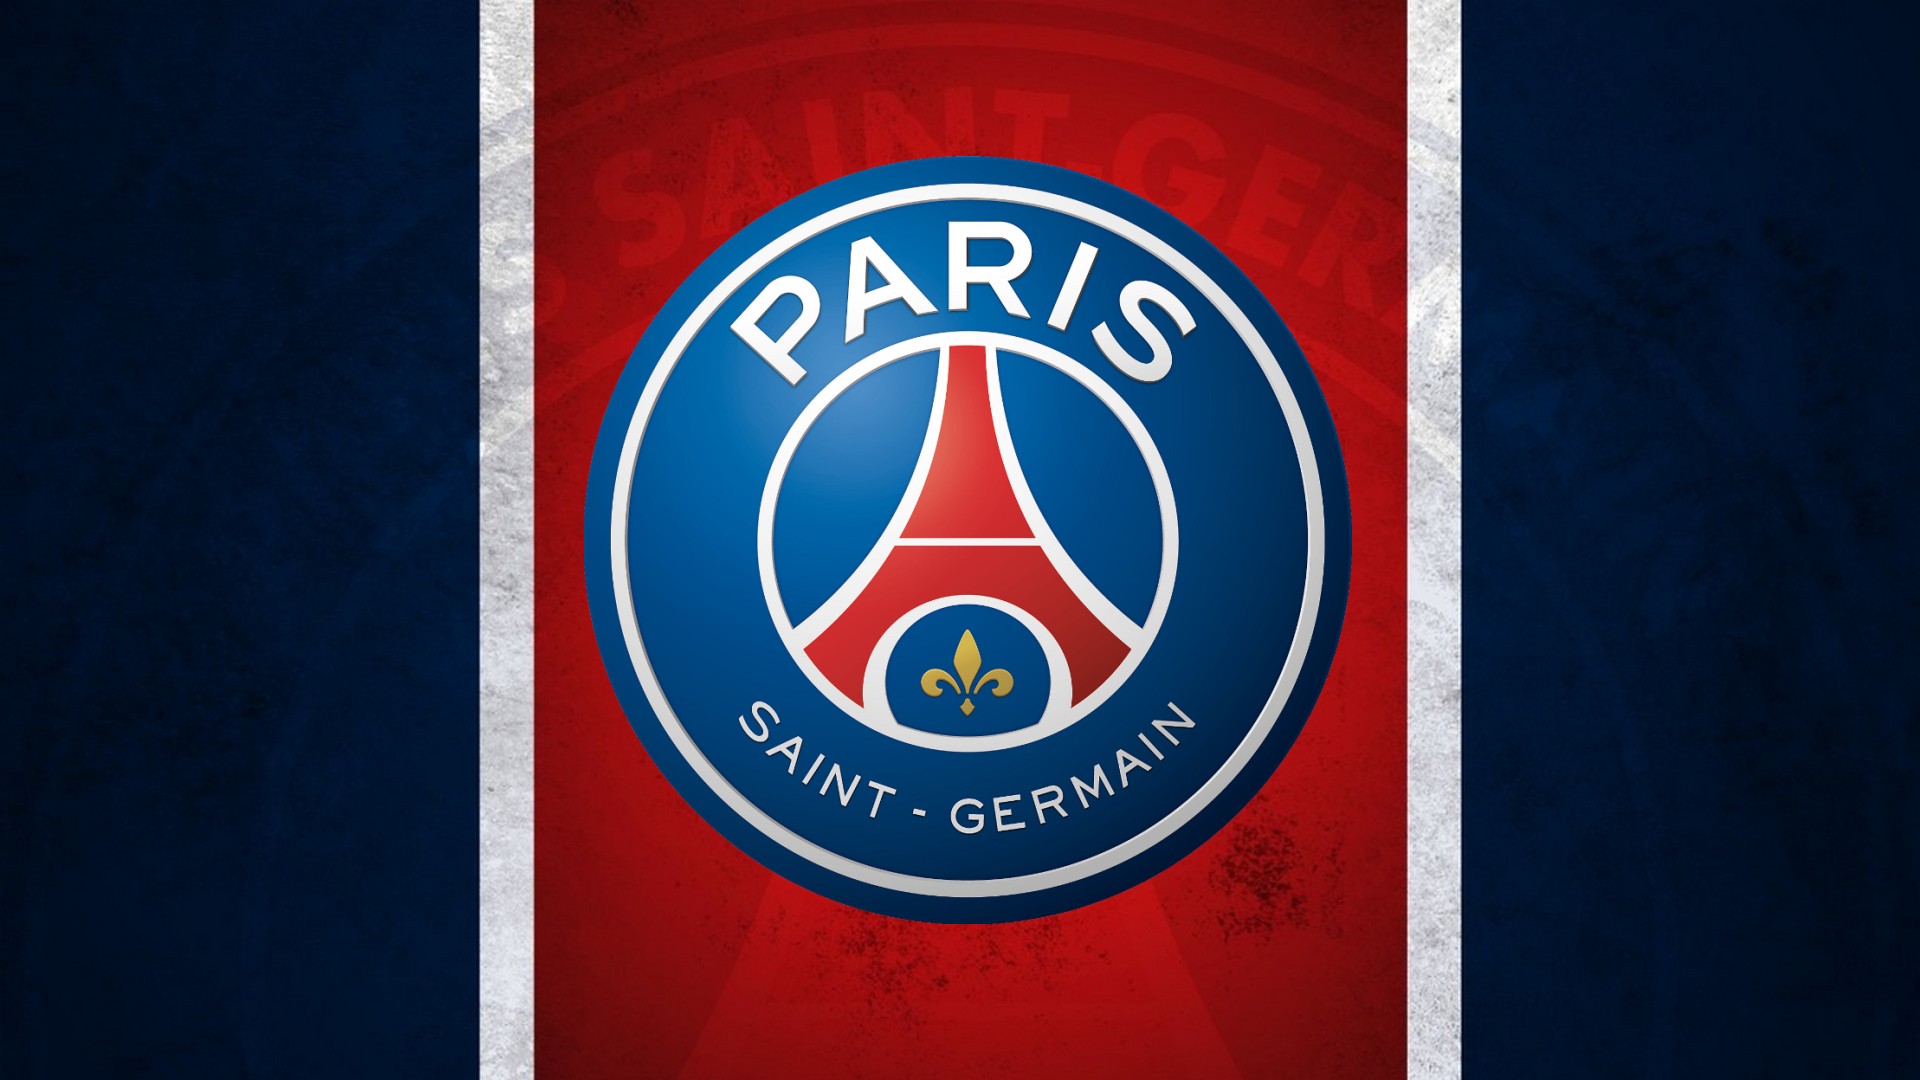 Paris Saint-Germain Desktop Wallpaper With Resolution 1920X1080 pixel. You can make this wallpaper for your Mac or Windows Desktop Background, iPhone, Android or Tablet and another Smartphone device for free